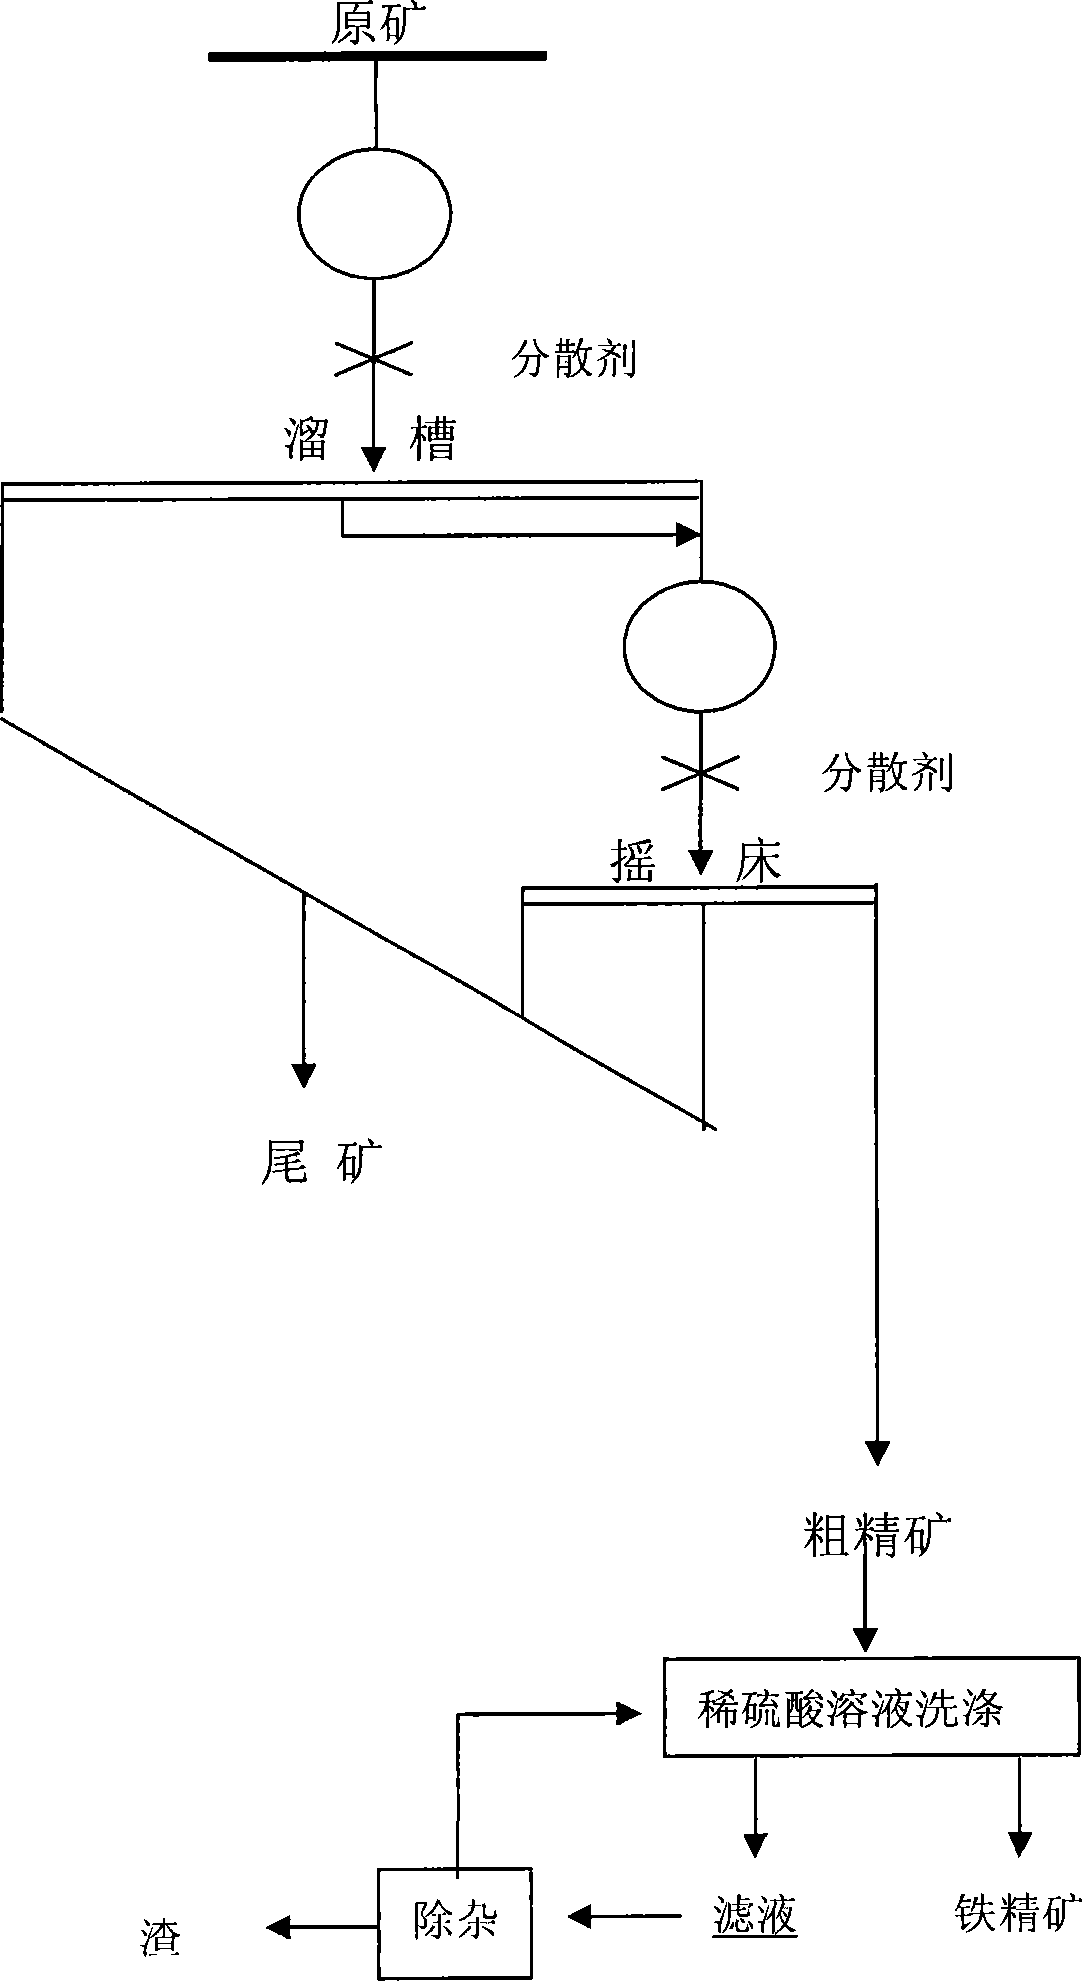 Method forpreparing iron concentrate for making iron from phosphorus-containing oolitic hematite